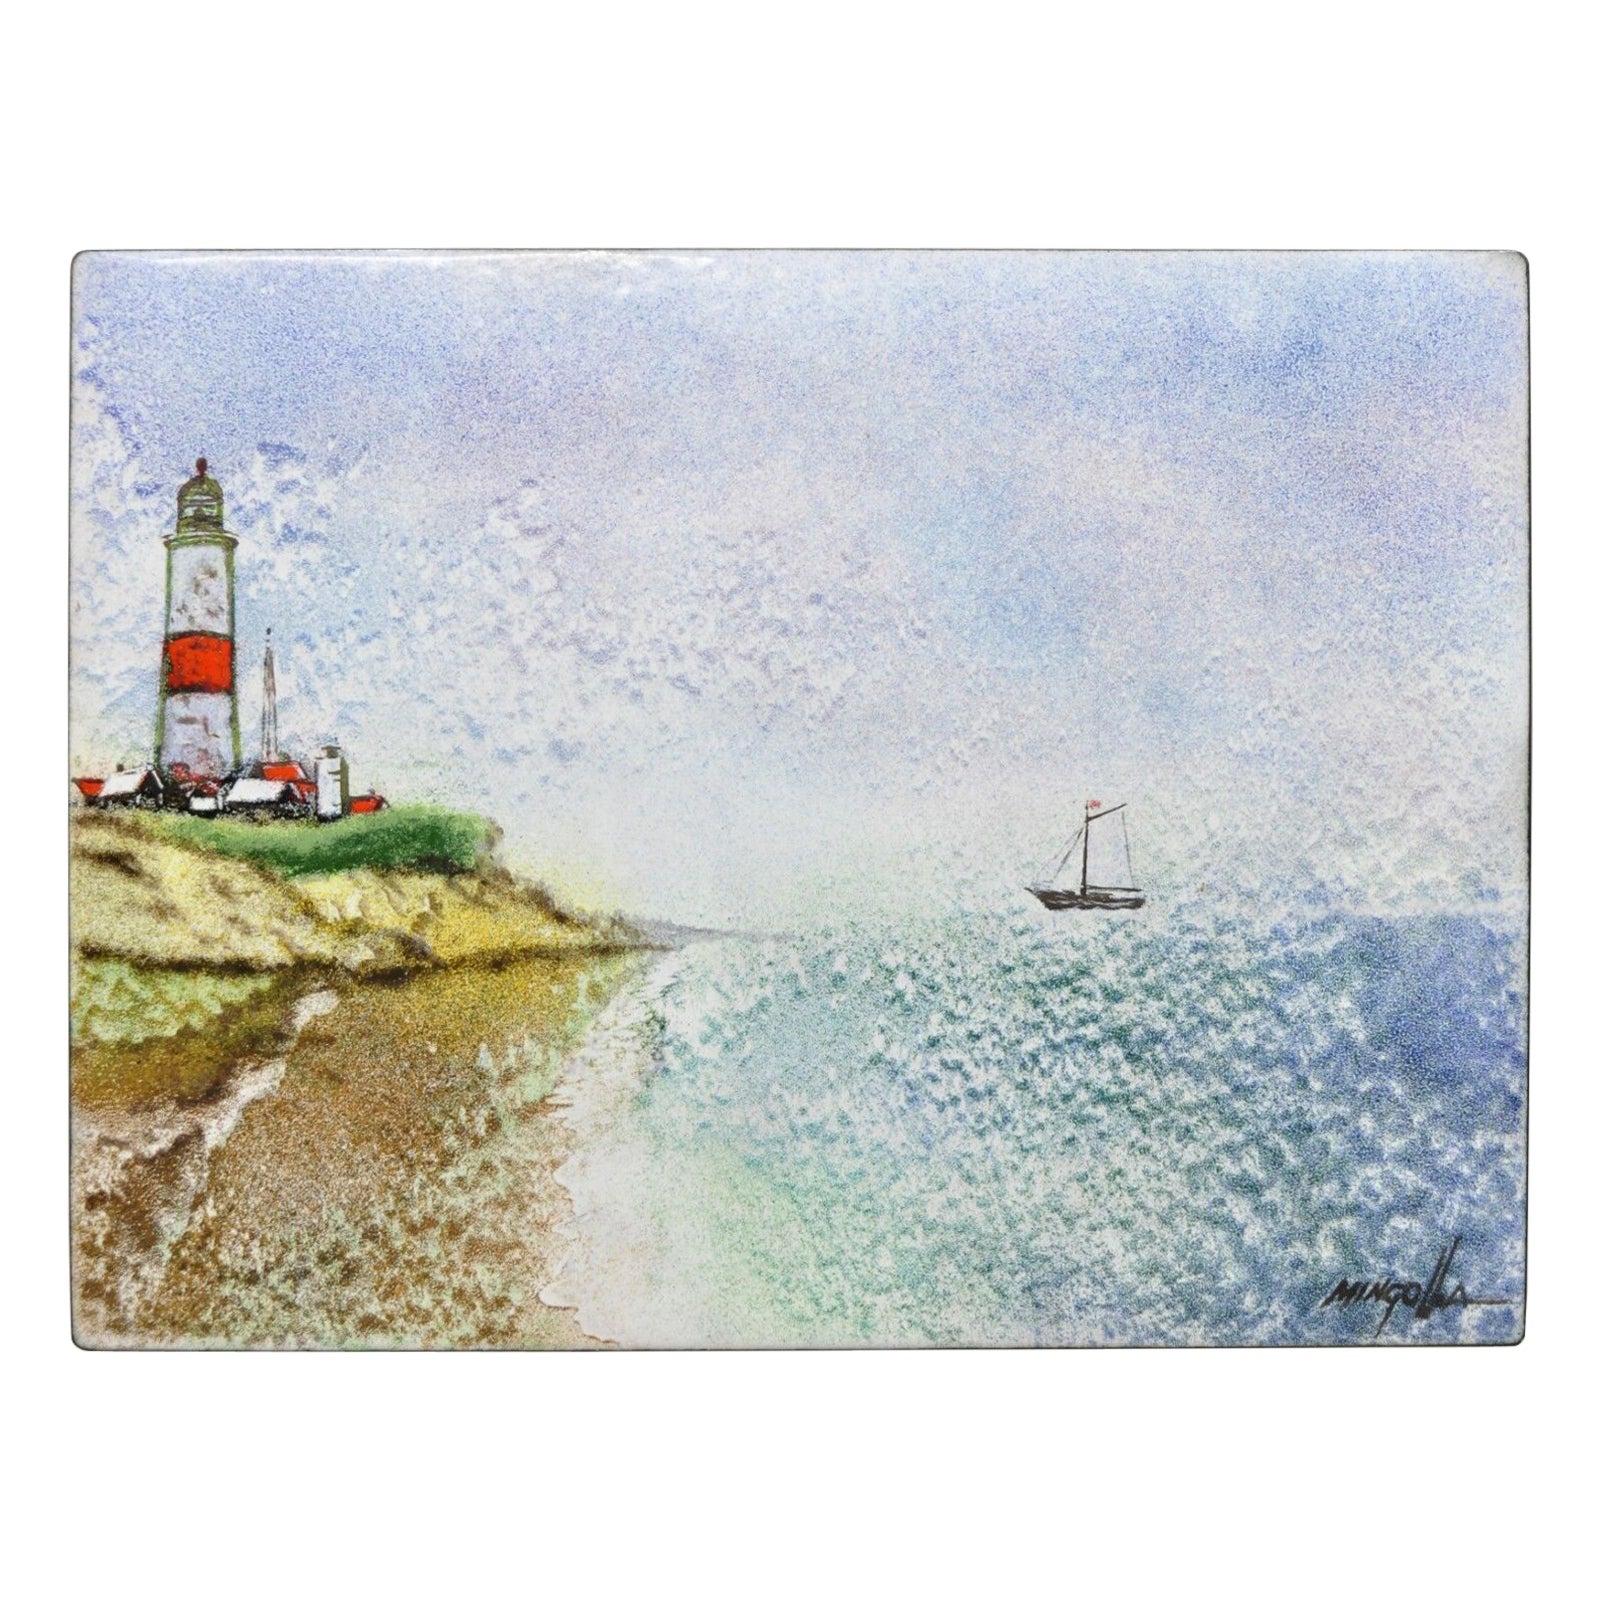 Dom Dominic Mingolla Enamel on Copper Painting Red Lighthouse Shoreline